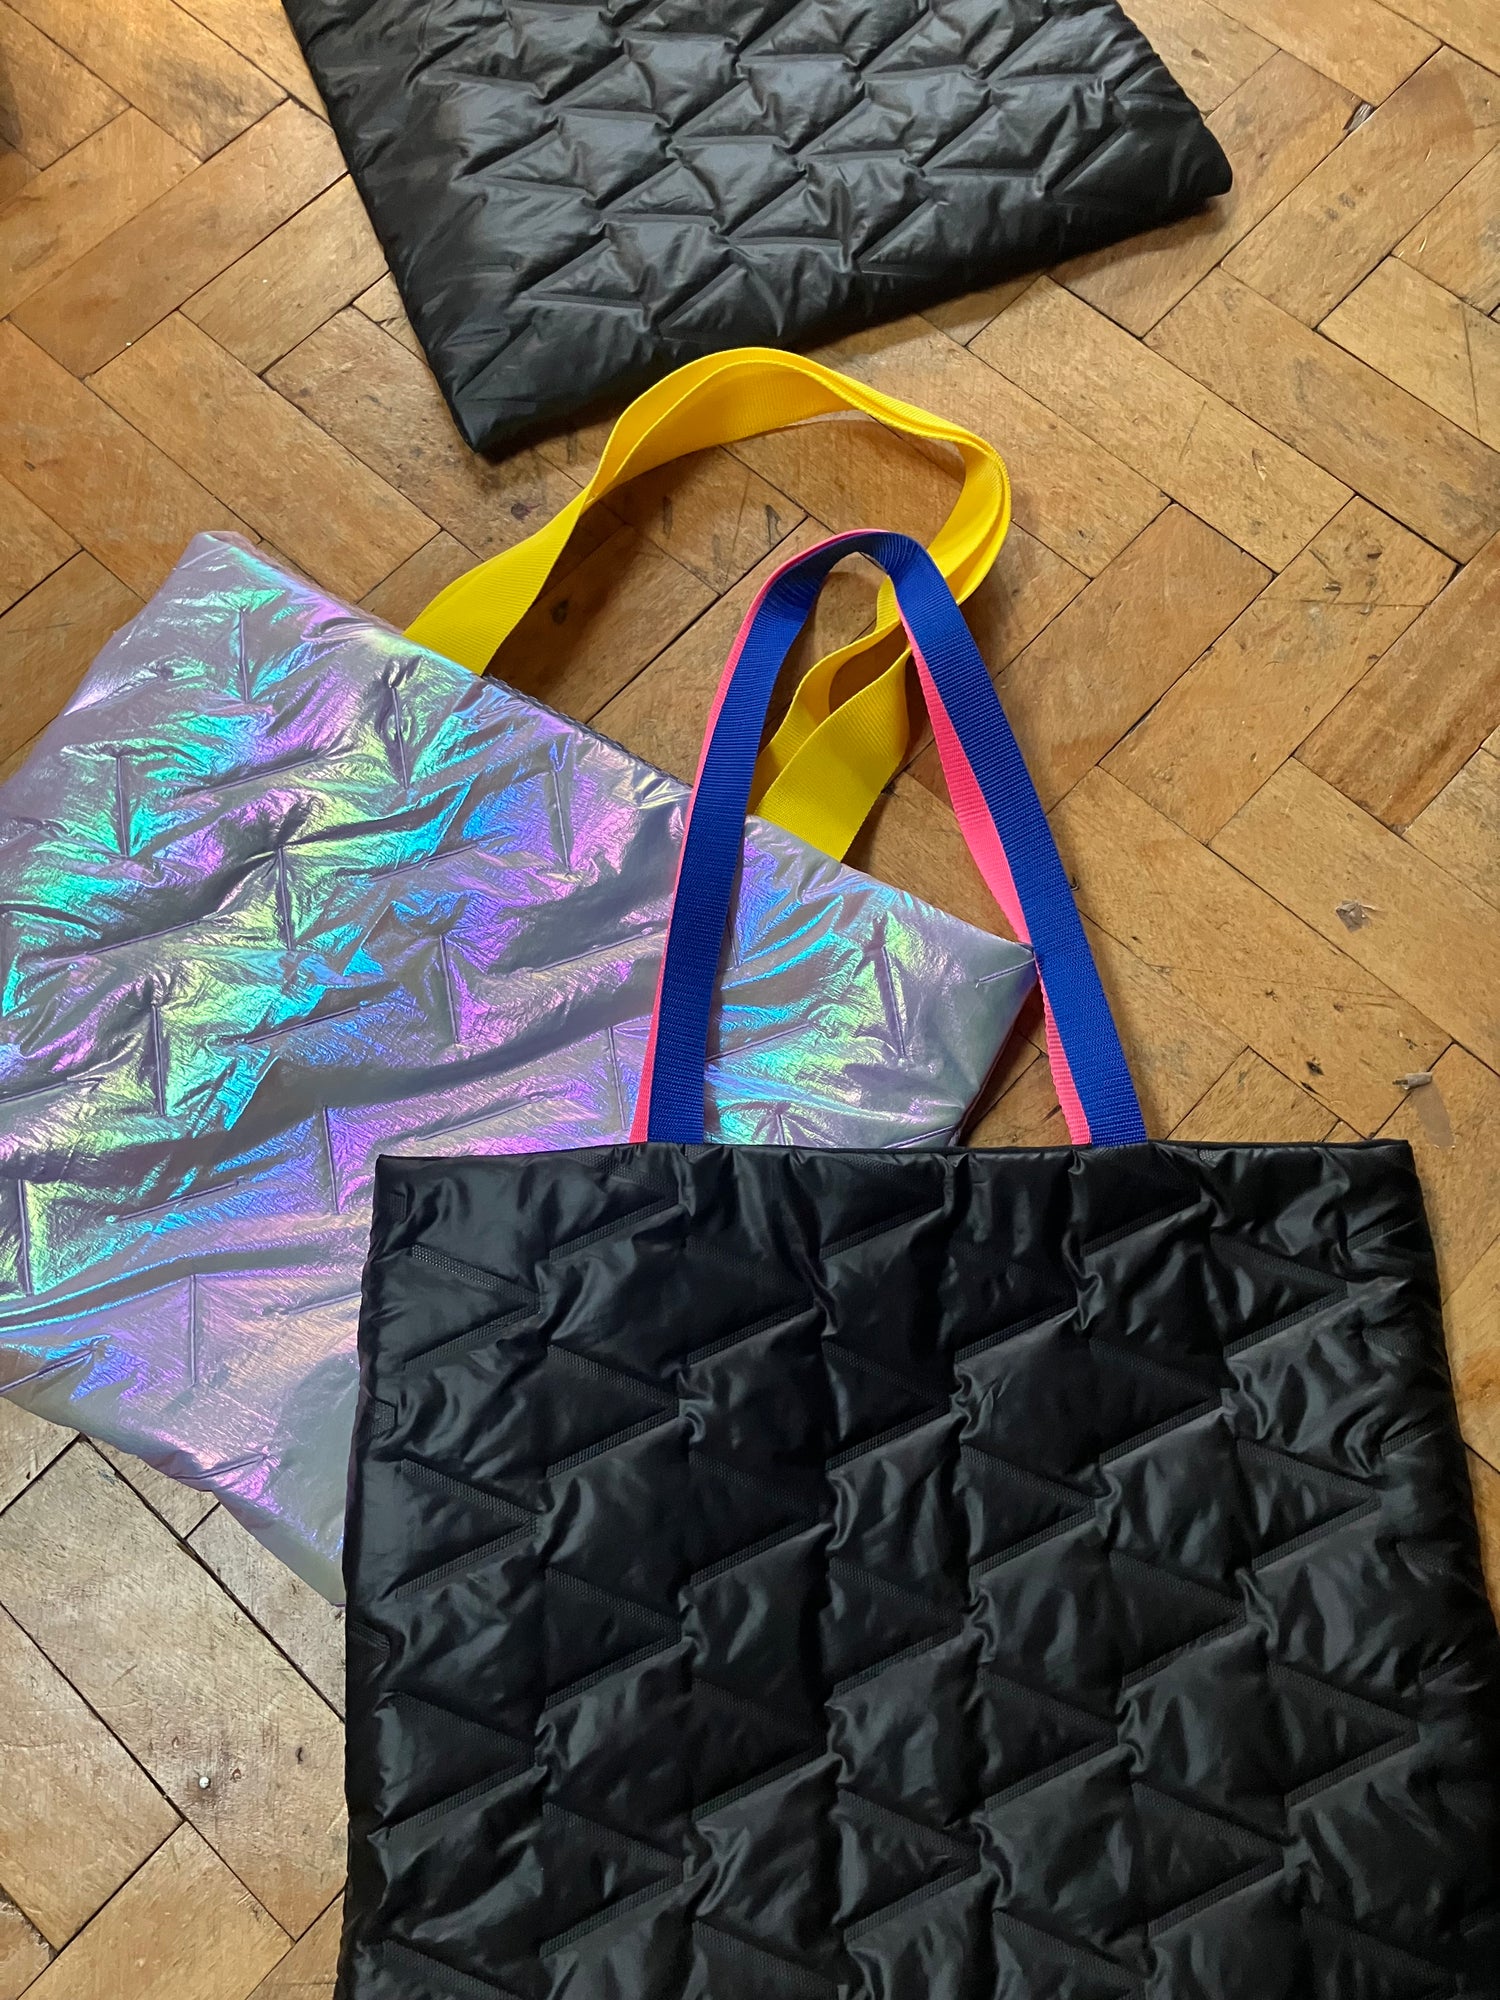 Quilt padded tote bags